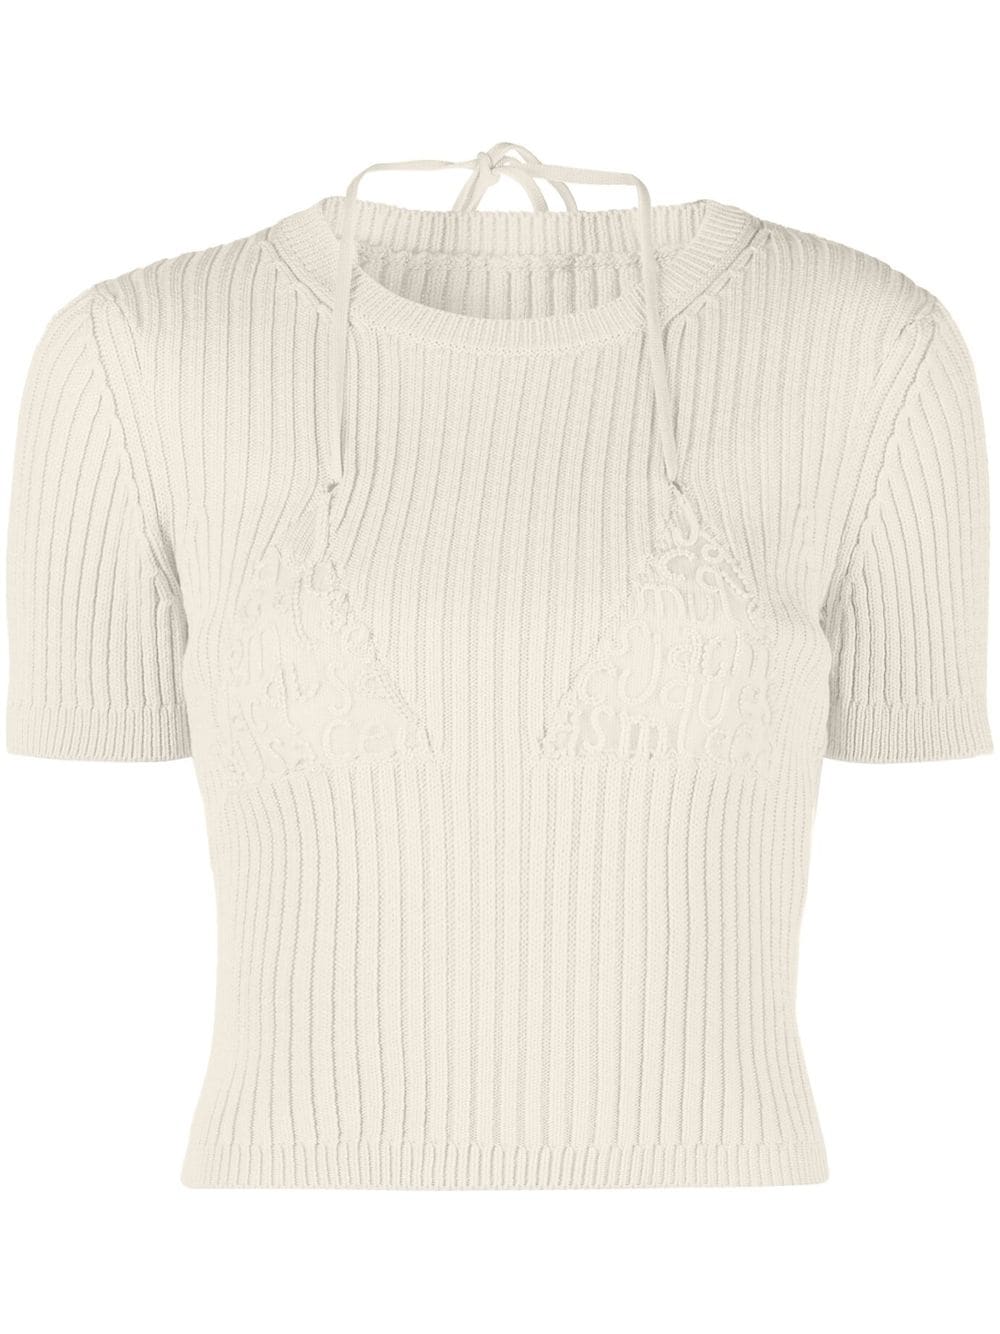 Jacquemus Cropped top - Beige